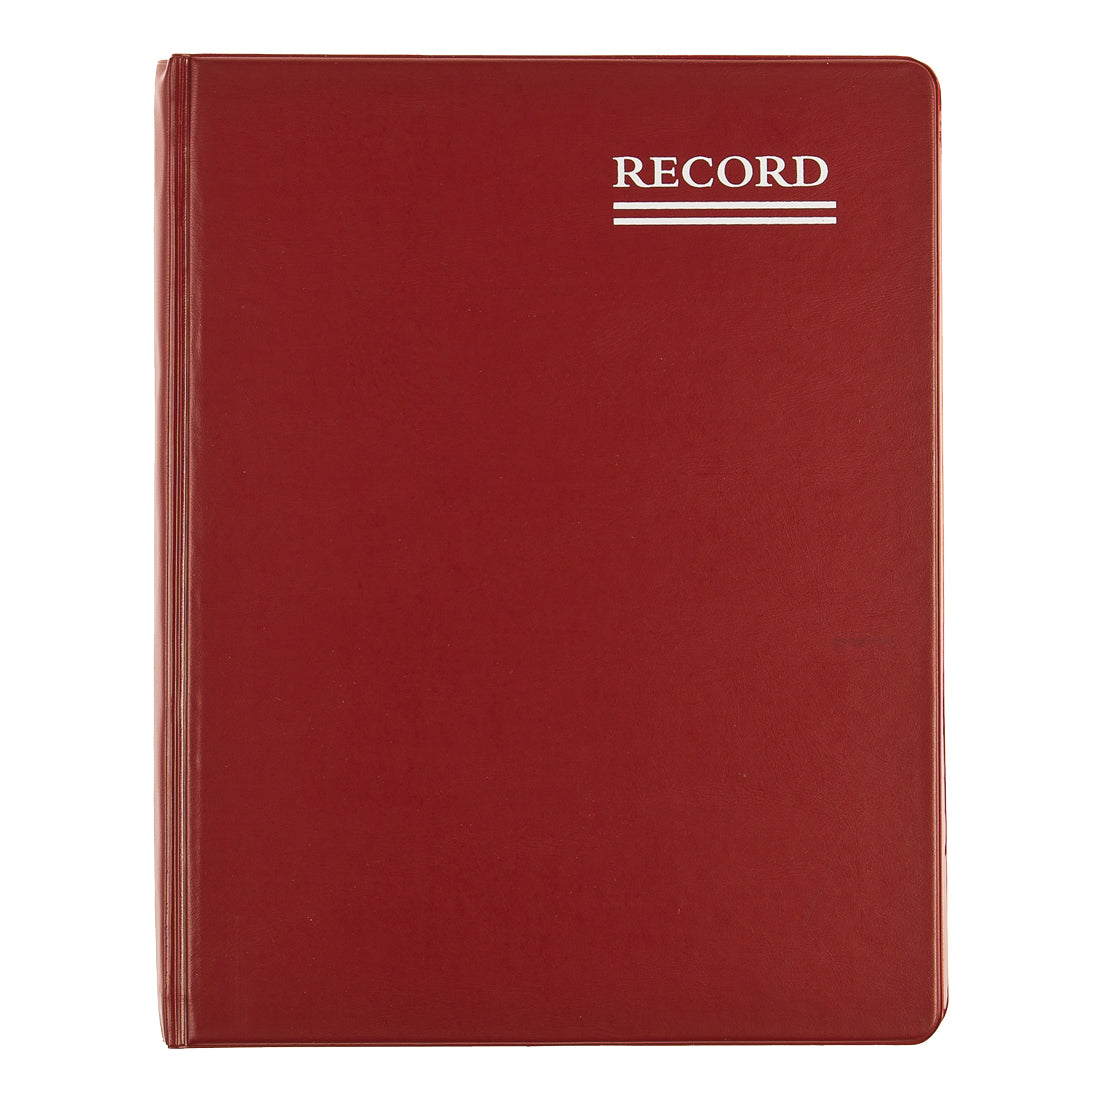 Red Vinyl Series Record Book 57231